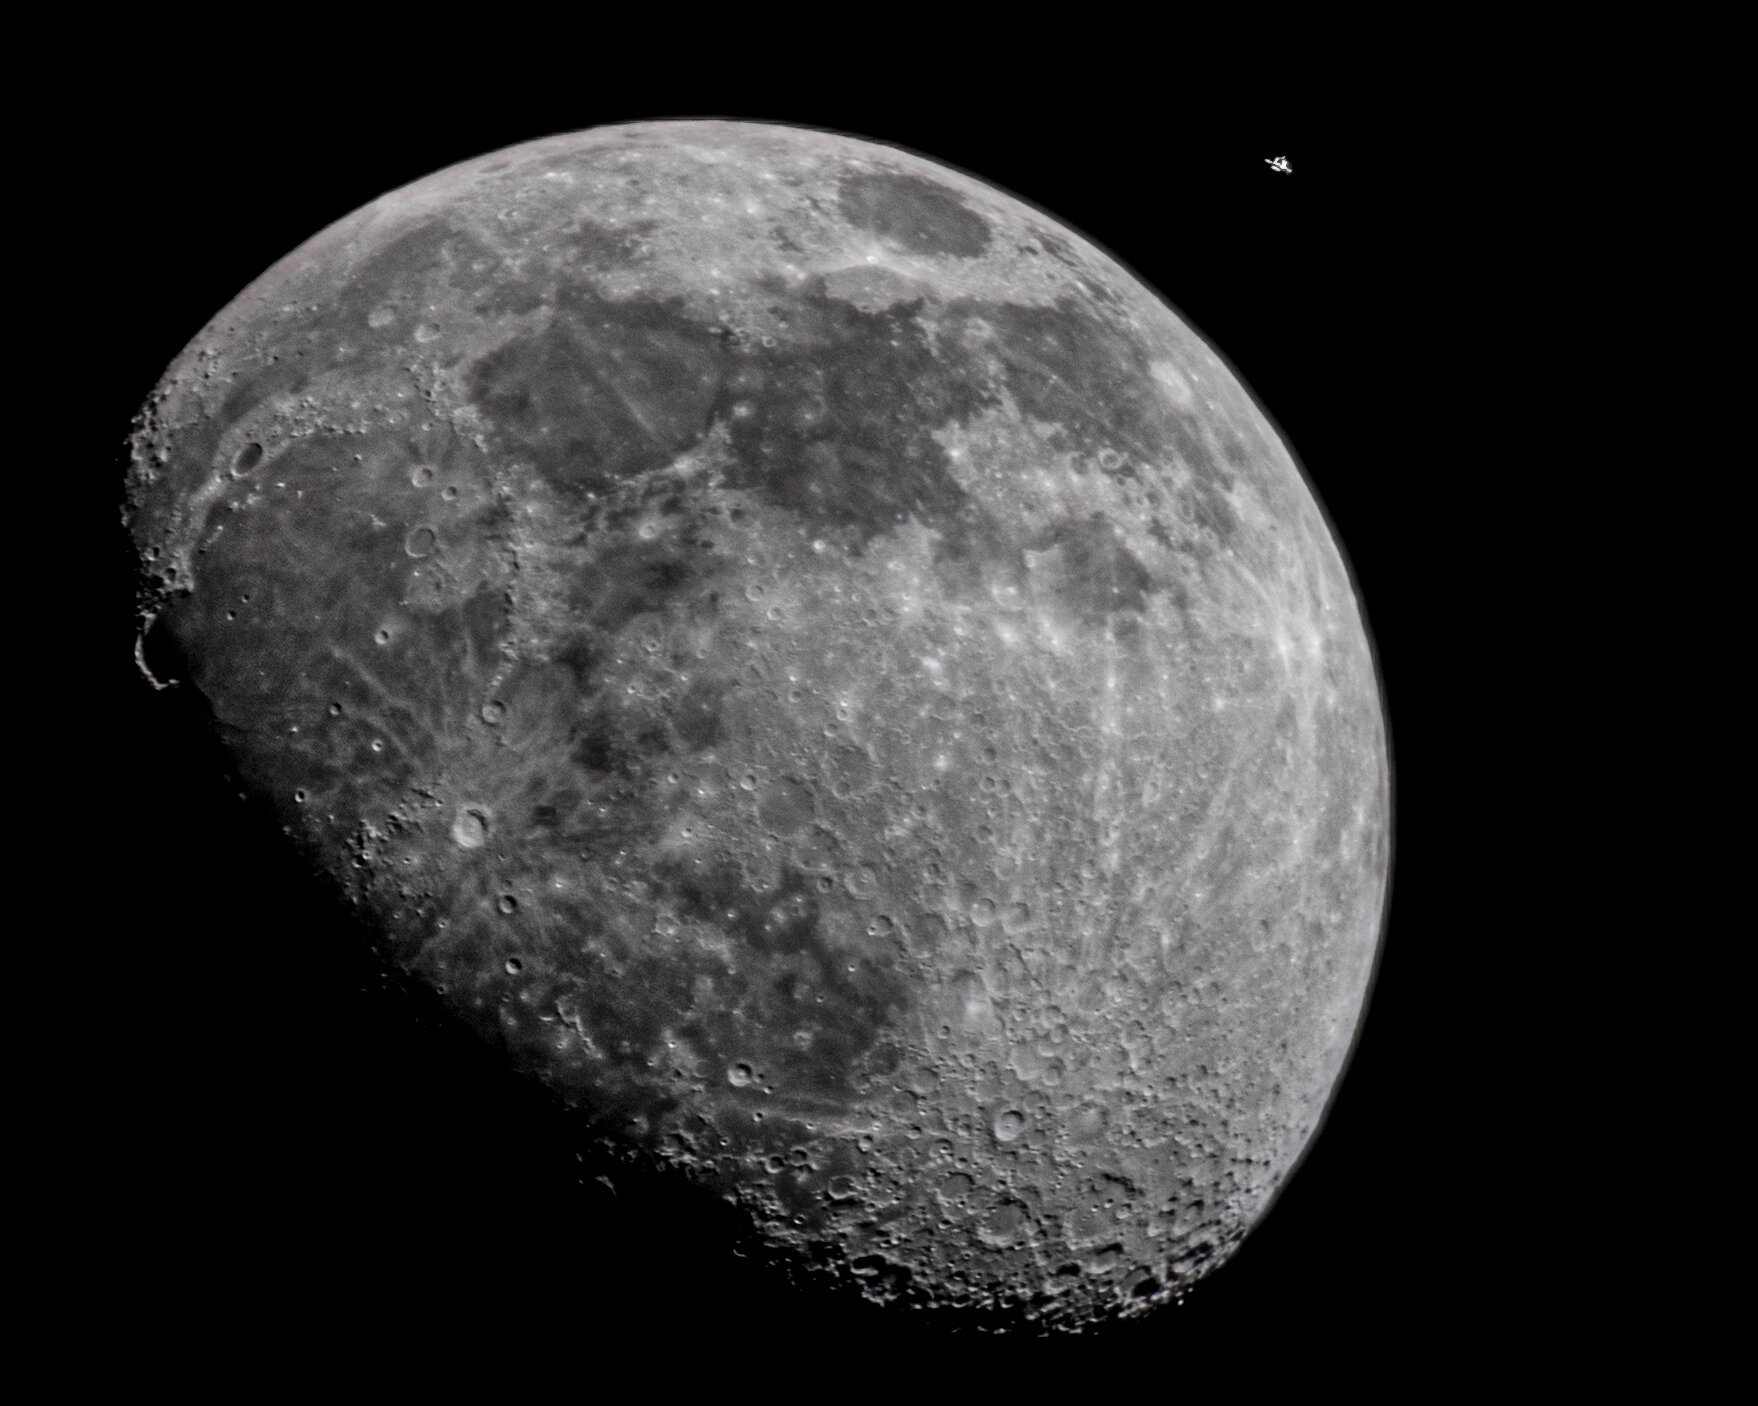 Iss passing in front of the moon